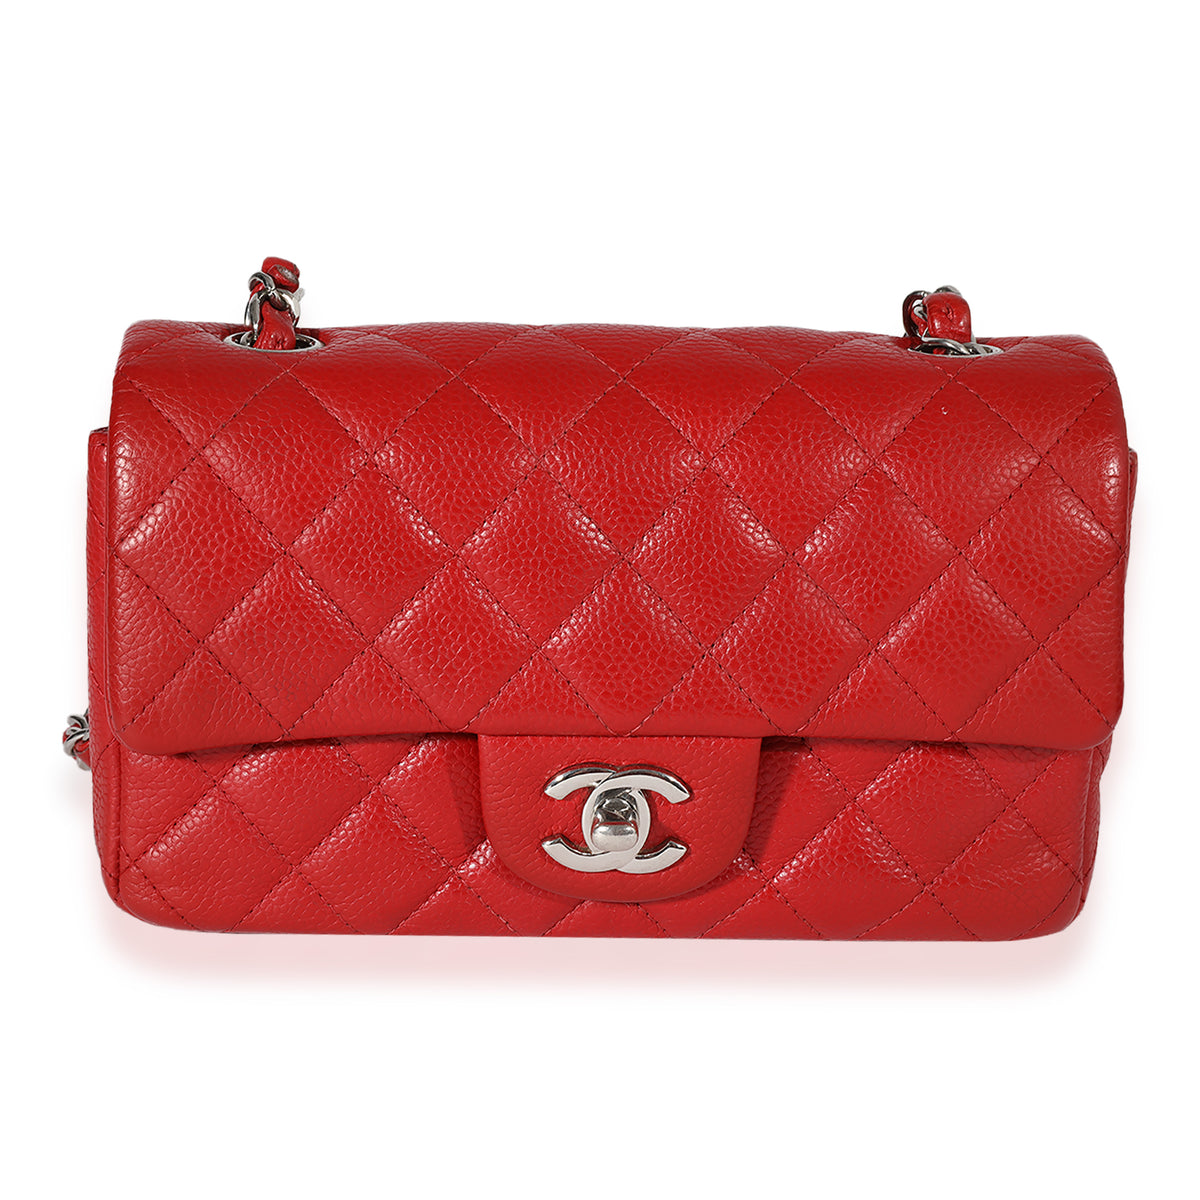 red bag chanel